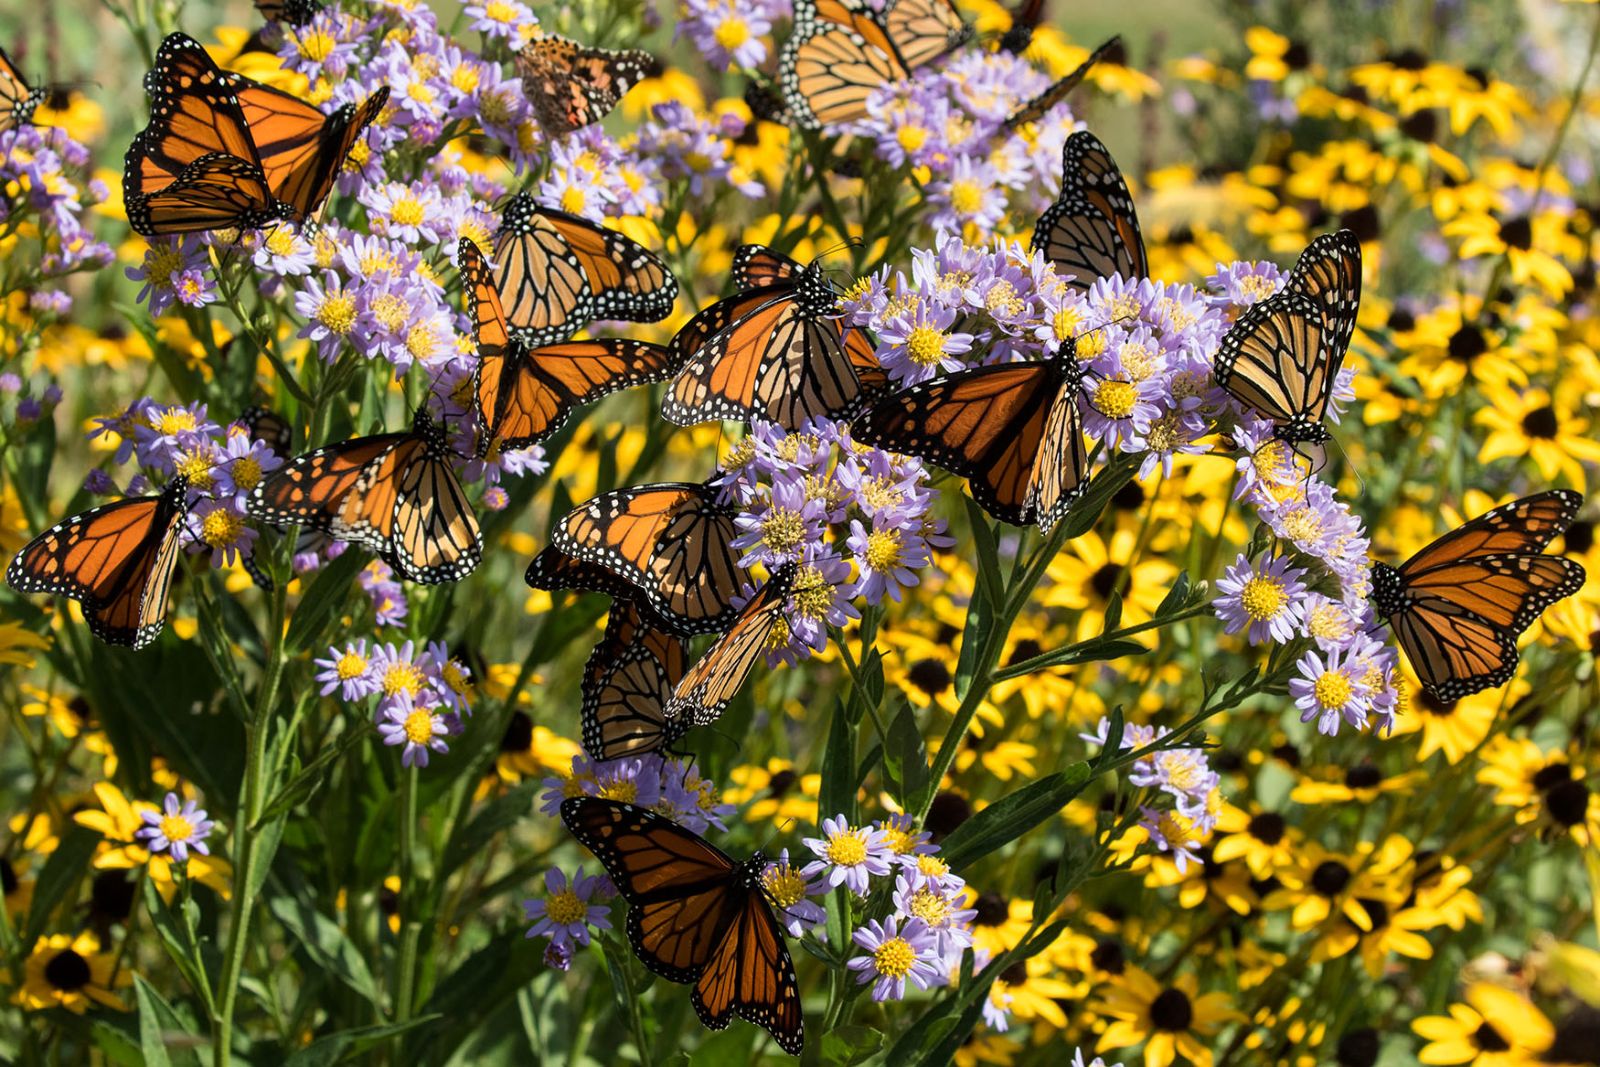 A Monarch Buttery feeds on Butterfly Weed (Asclepias tuberosa). Photo: Don Riepe